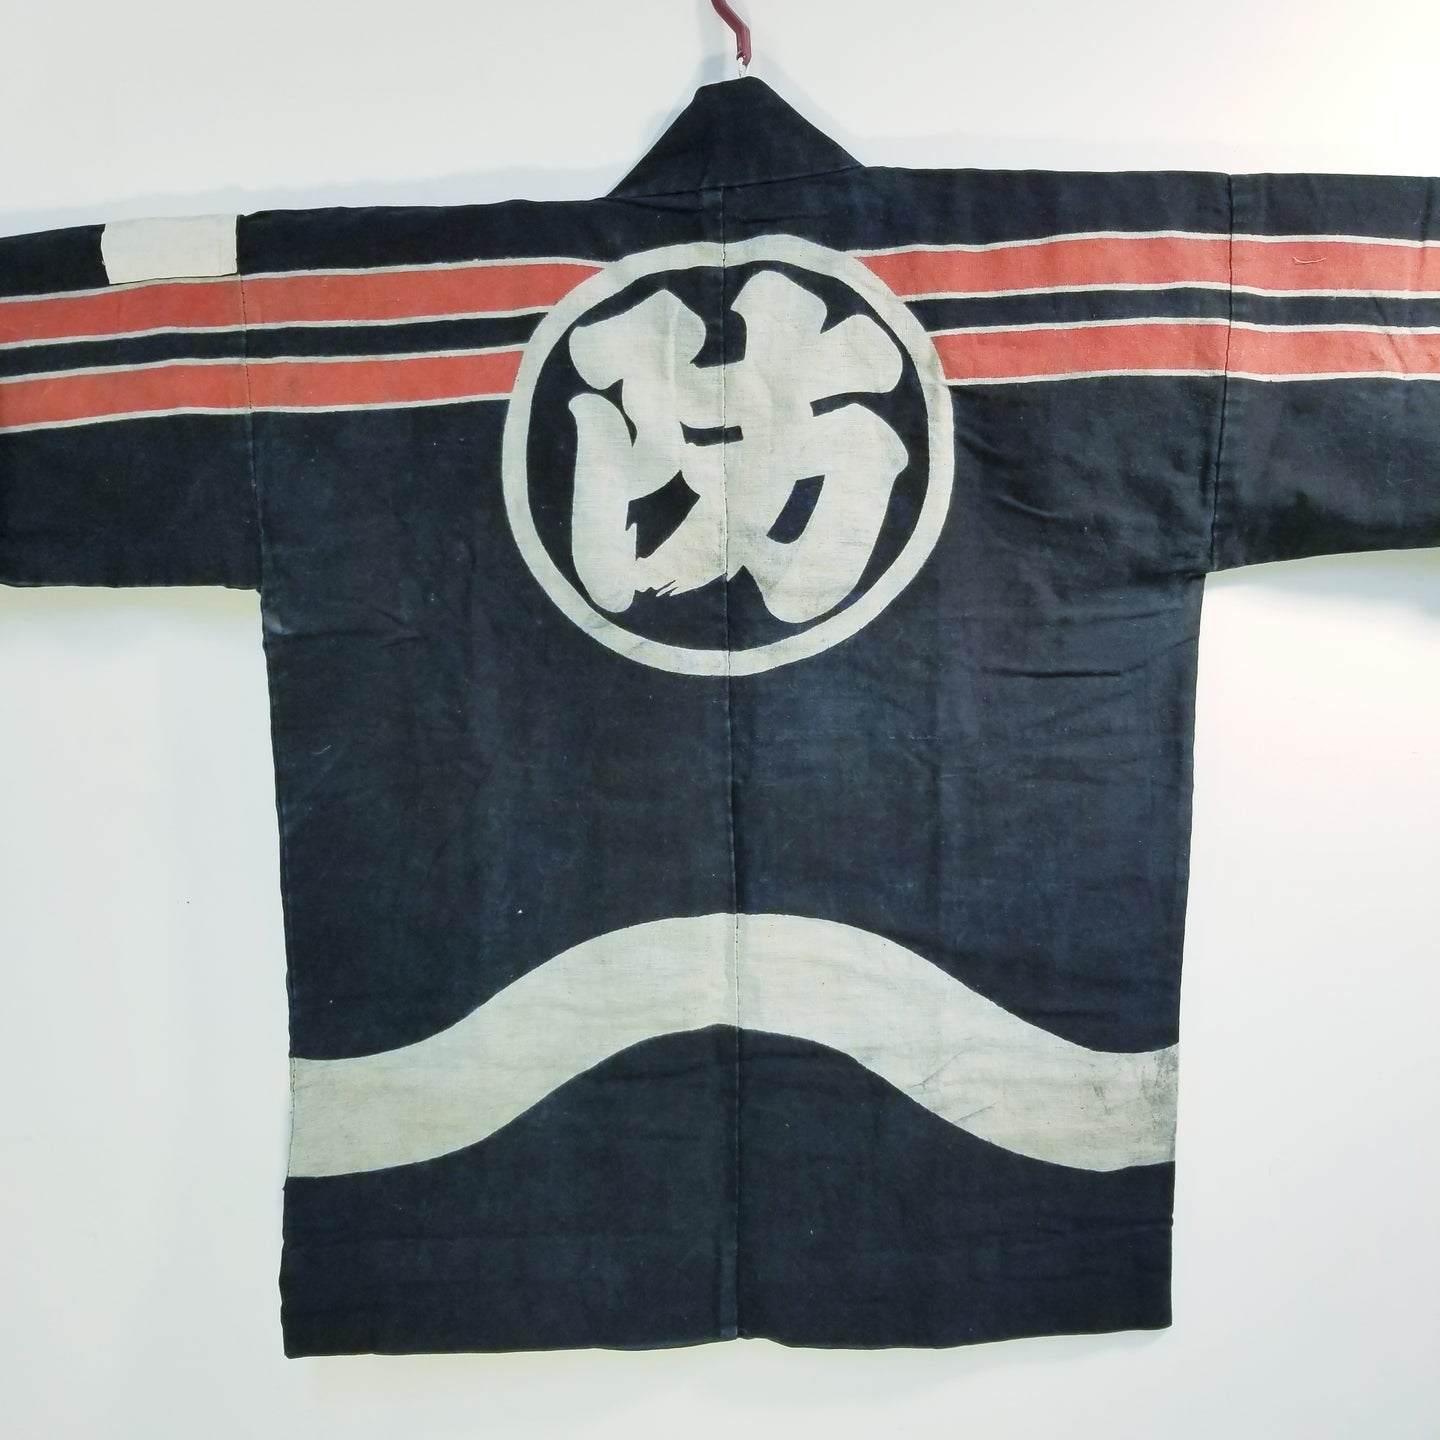 Showa Japanese Fireman's Jacket from ハ尋村 (size measurement / tags)